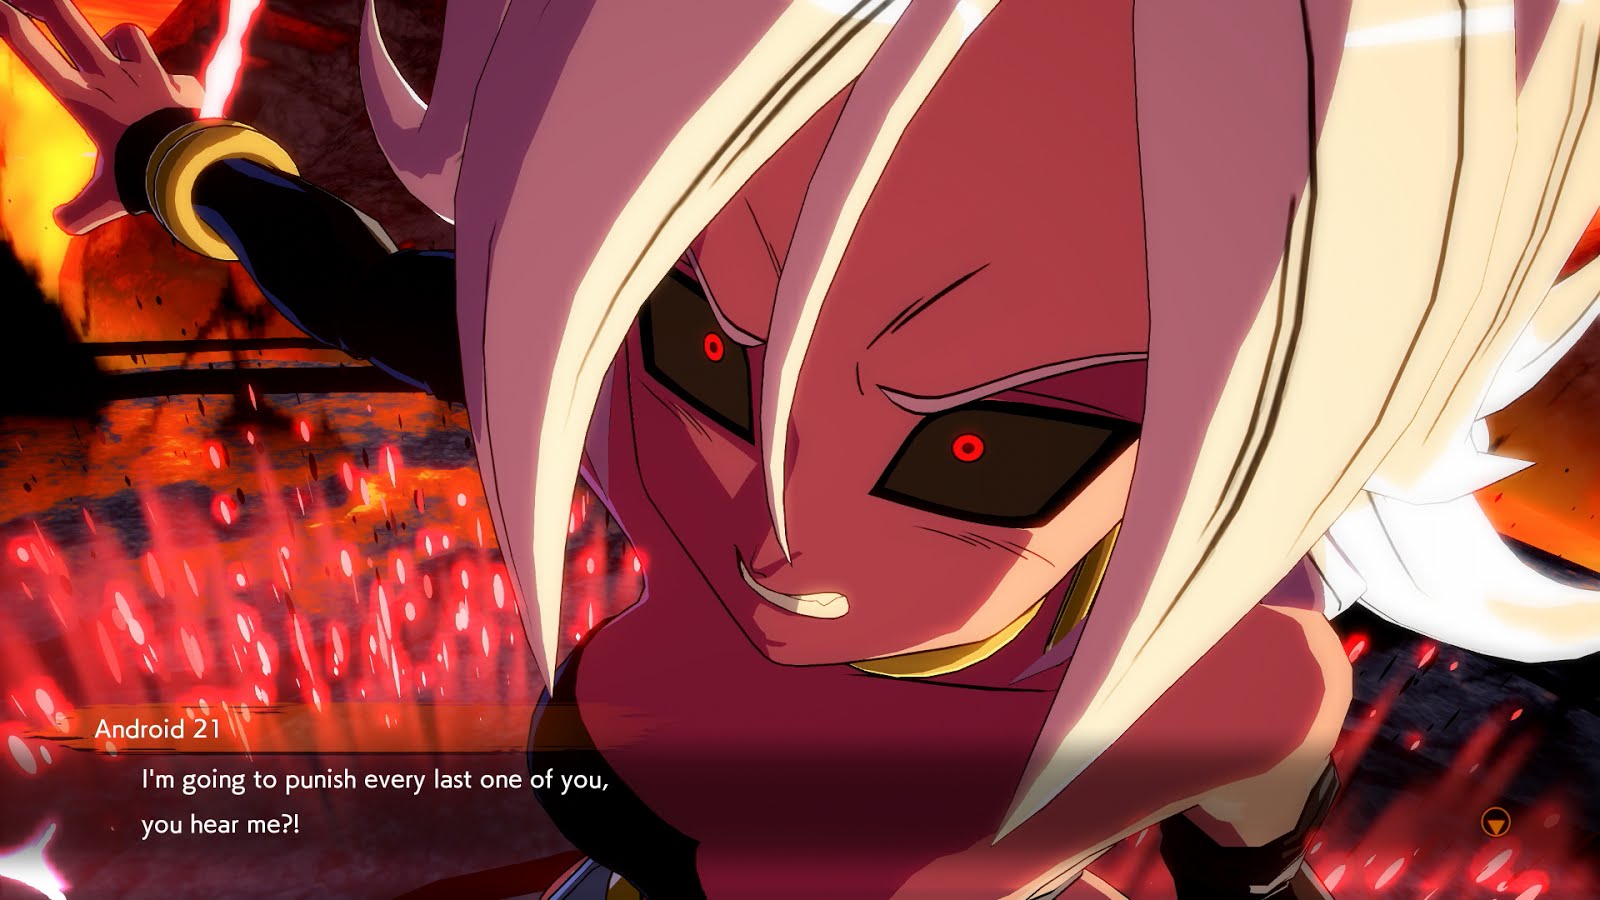 Android 21 joins DRAGON BALL FighterZ as Playable Character! - The Tech Revolutionist